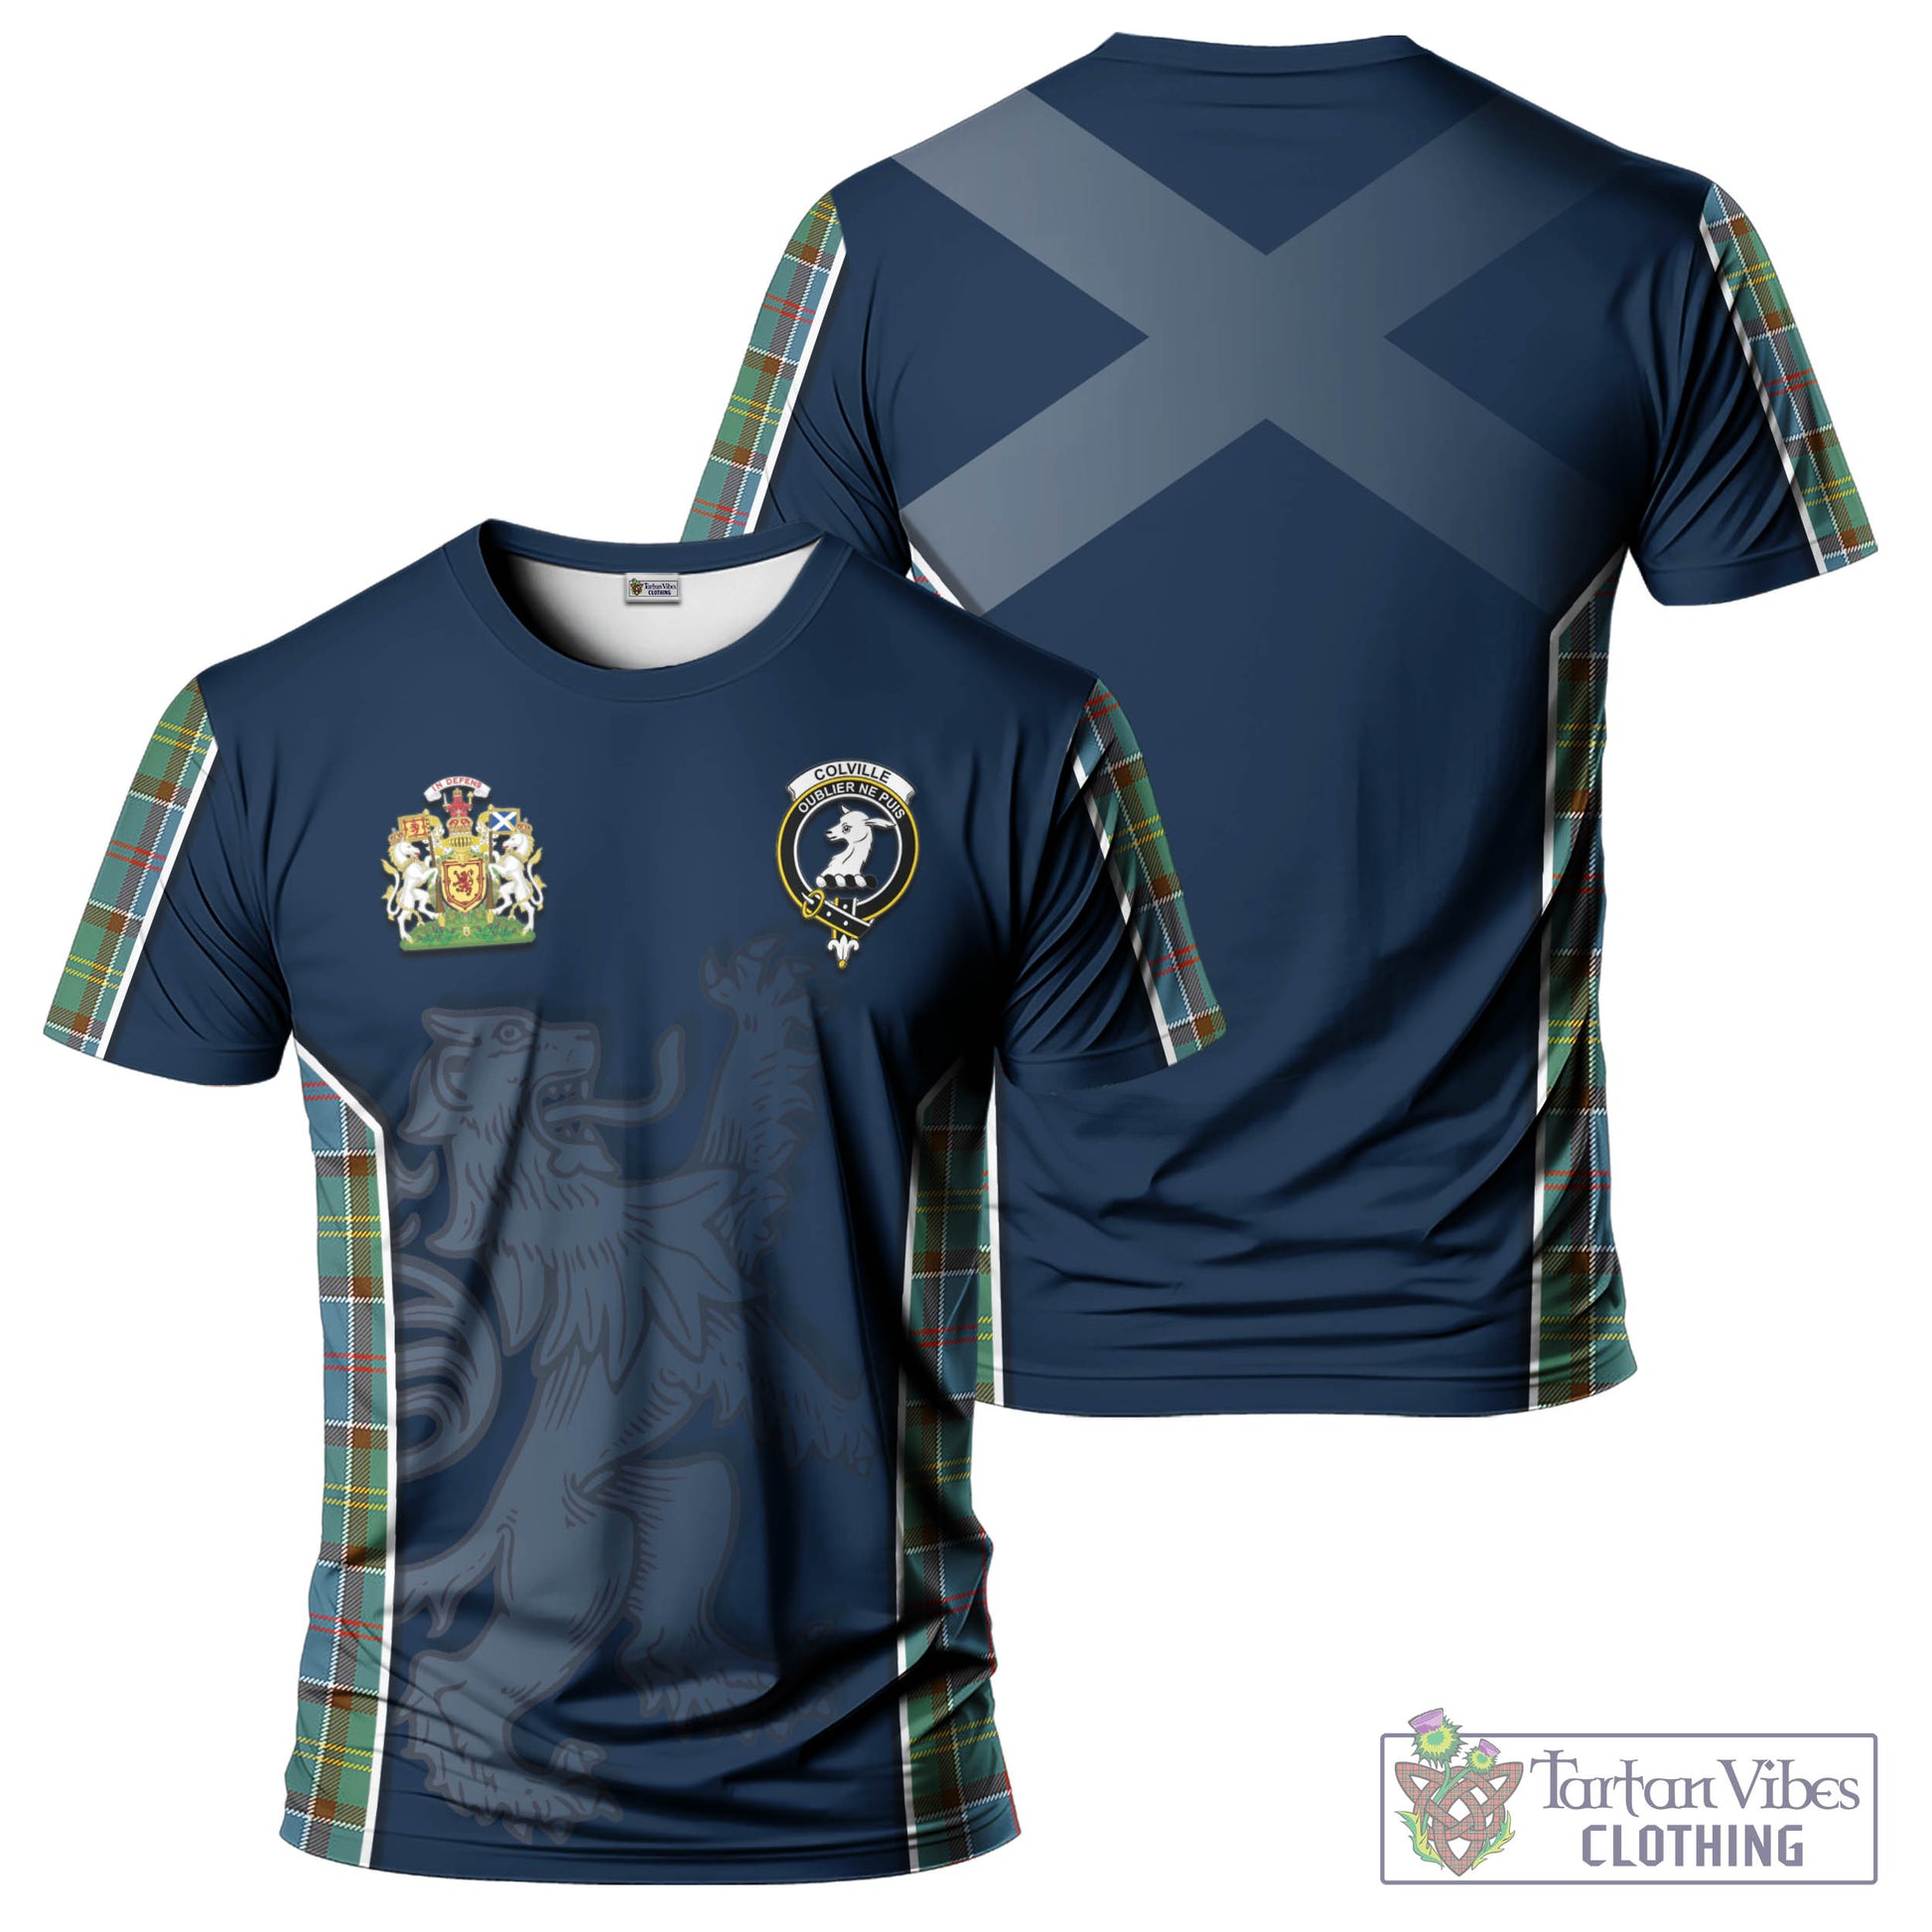 Tartan Vibes Clothing Colville Tartan T-Shirt with Family Crest and Lion Rampant Vibes Sport Style